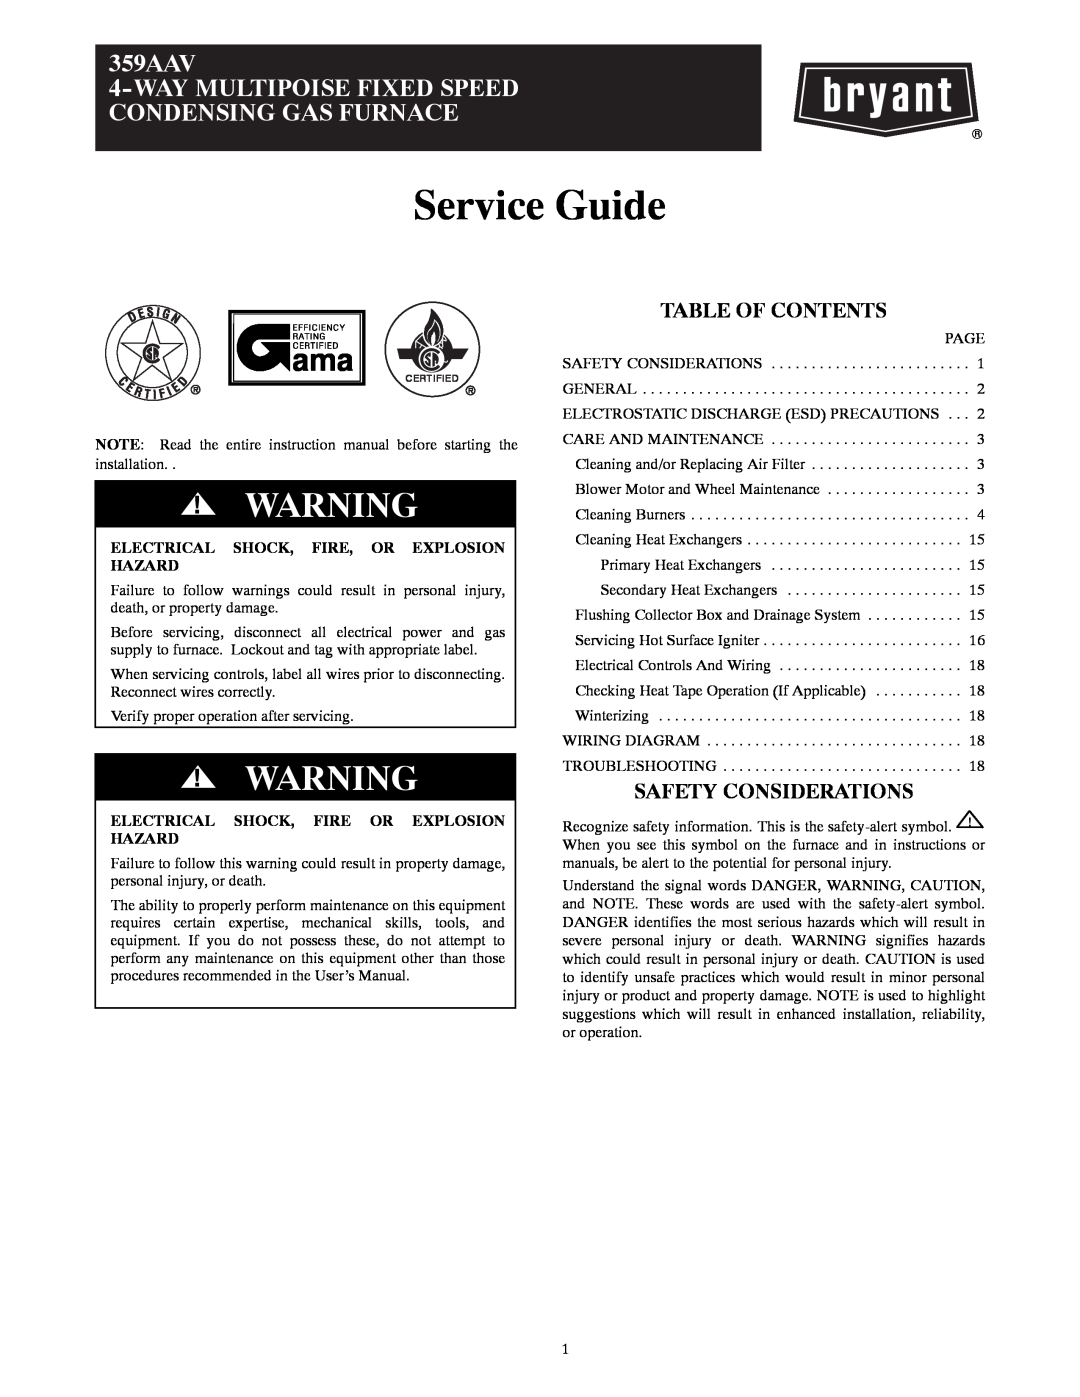 Bryant 359AAV owner manual Fire Or Explosion Hazard, Carbon Monoxide Poisoning Hazard, Safety Considerations 